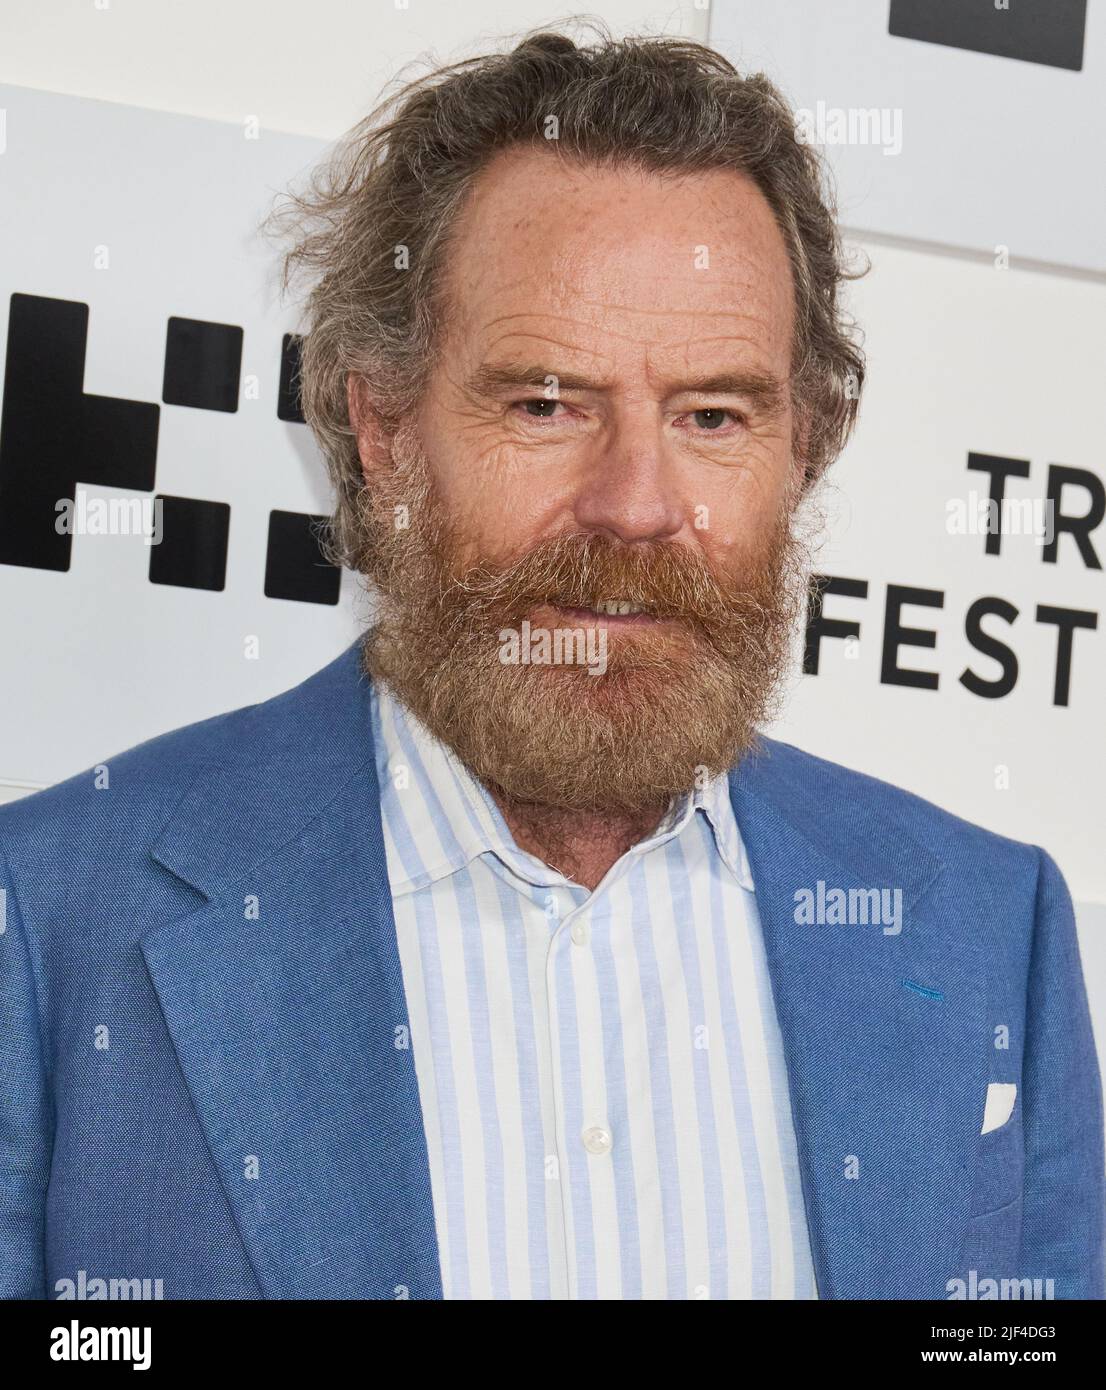 NEW YORK, NY, USA - JUNE 15, 2022: Bryan Cranston attends the Tribeca Festival Premiere of 'Jerry & Marge Go Large'. Stock Photo